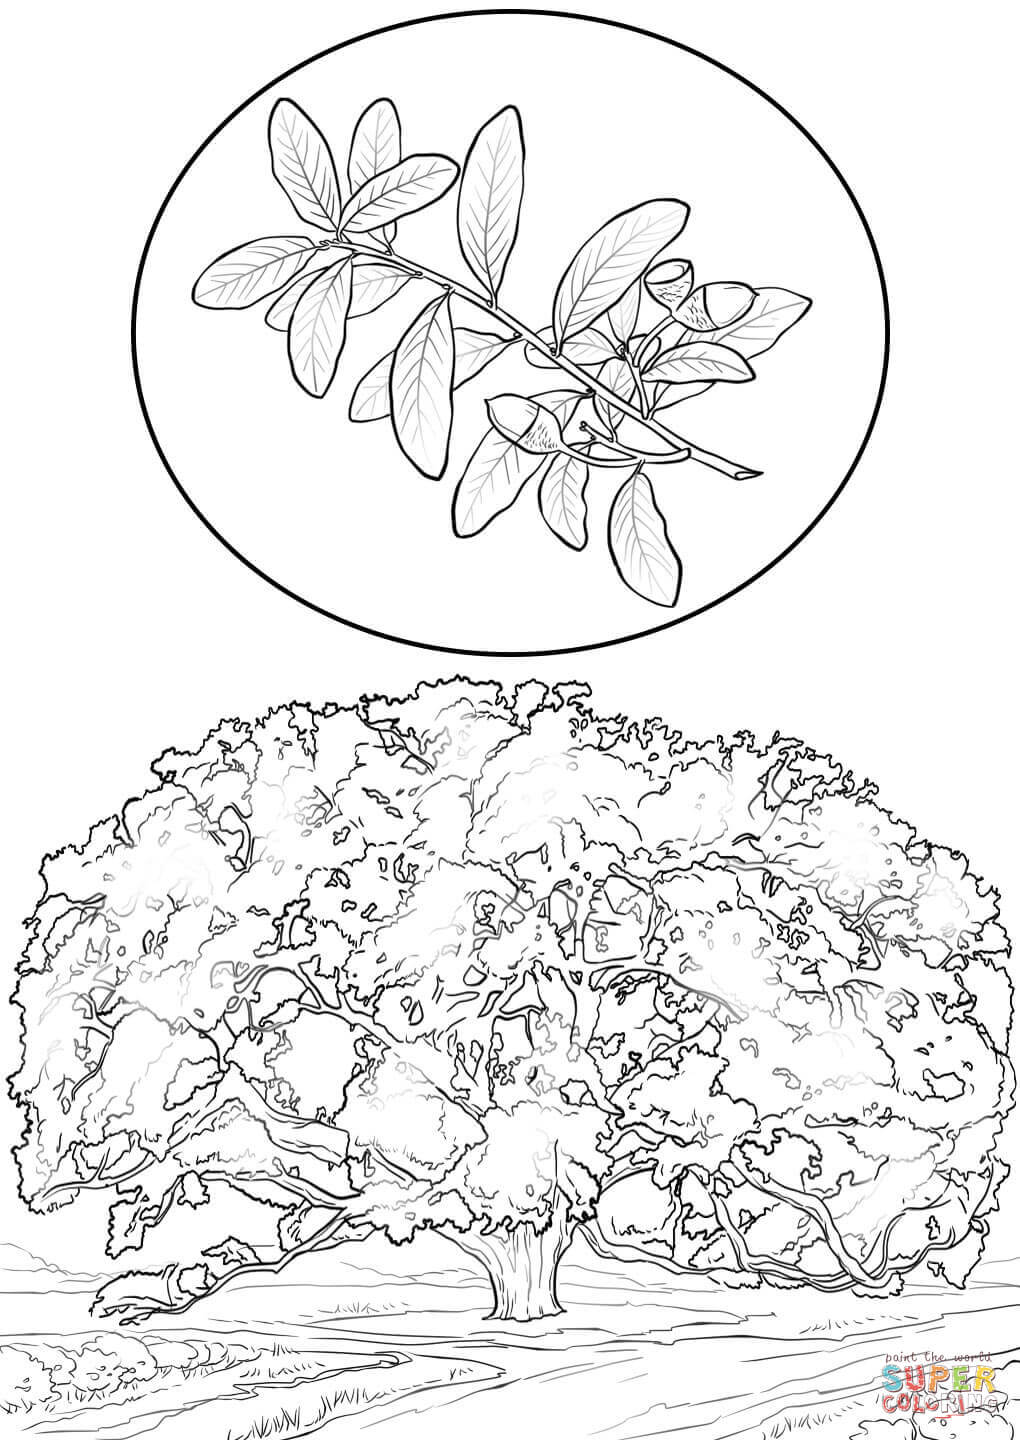 Southern live oak coloring page free printable coloring pages